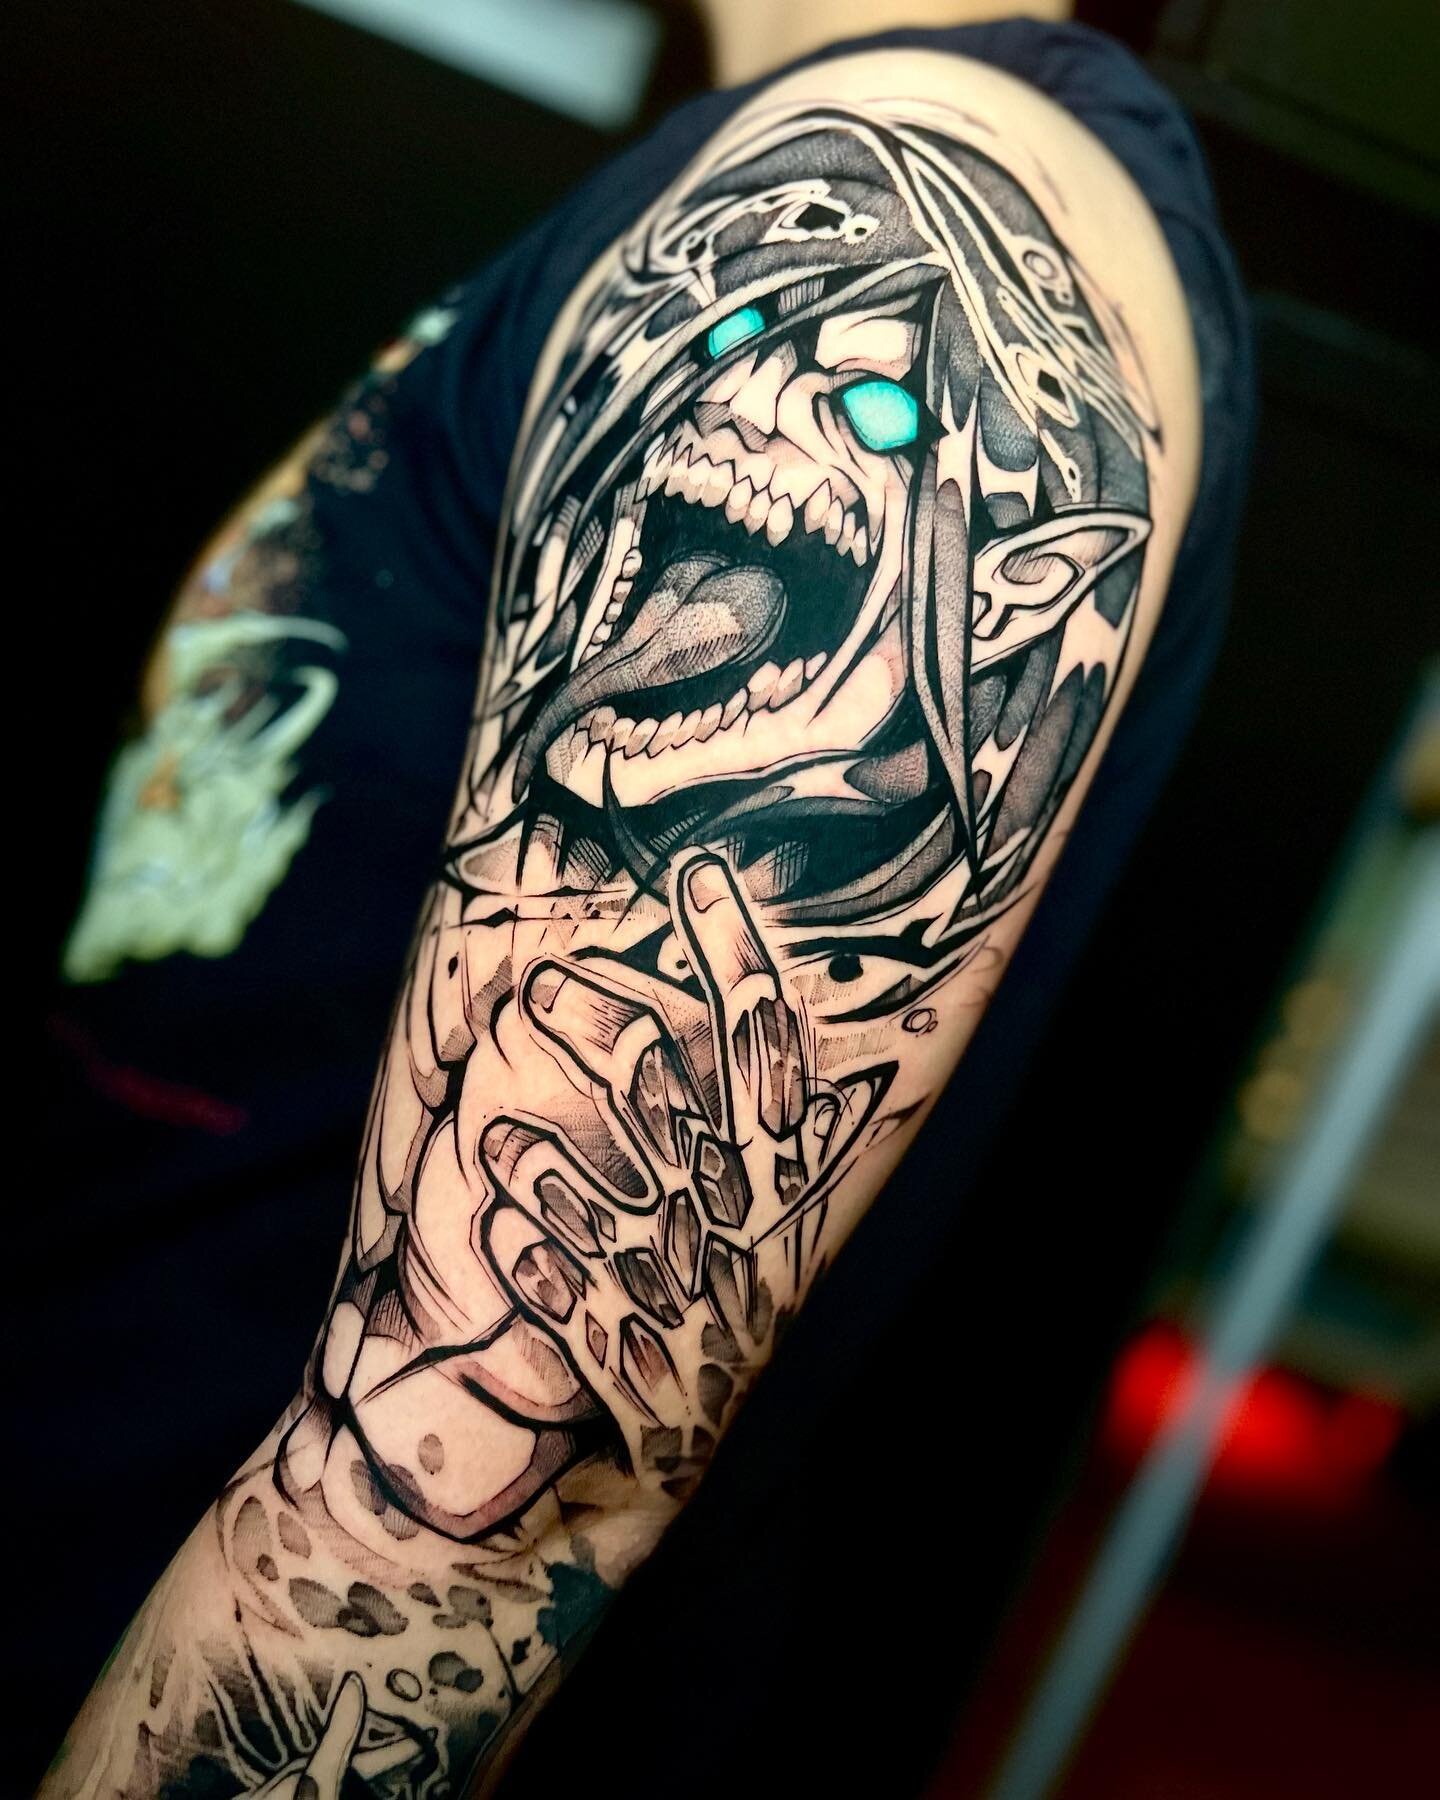 The Attack Titan which is my favvooritteee from Attack on Titan! This is a project sleeve in progress for our friend @weights.and.foodie.dates (thank you for being tough as nails)! If you haven&rsquo;t watched it or haven&rsquo;t caught up, you need 